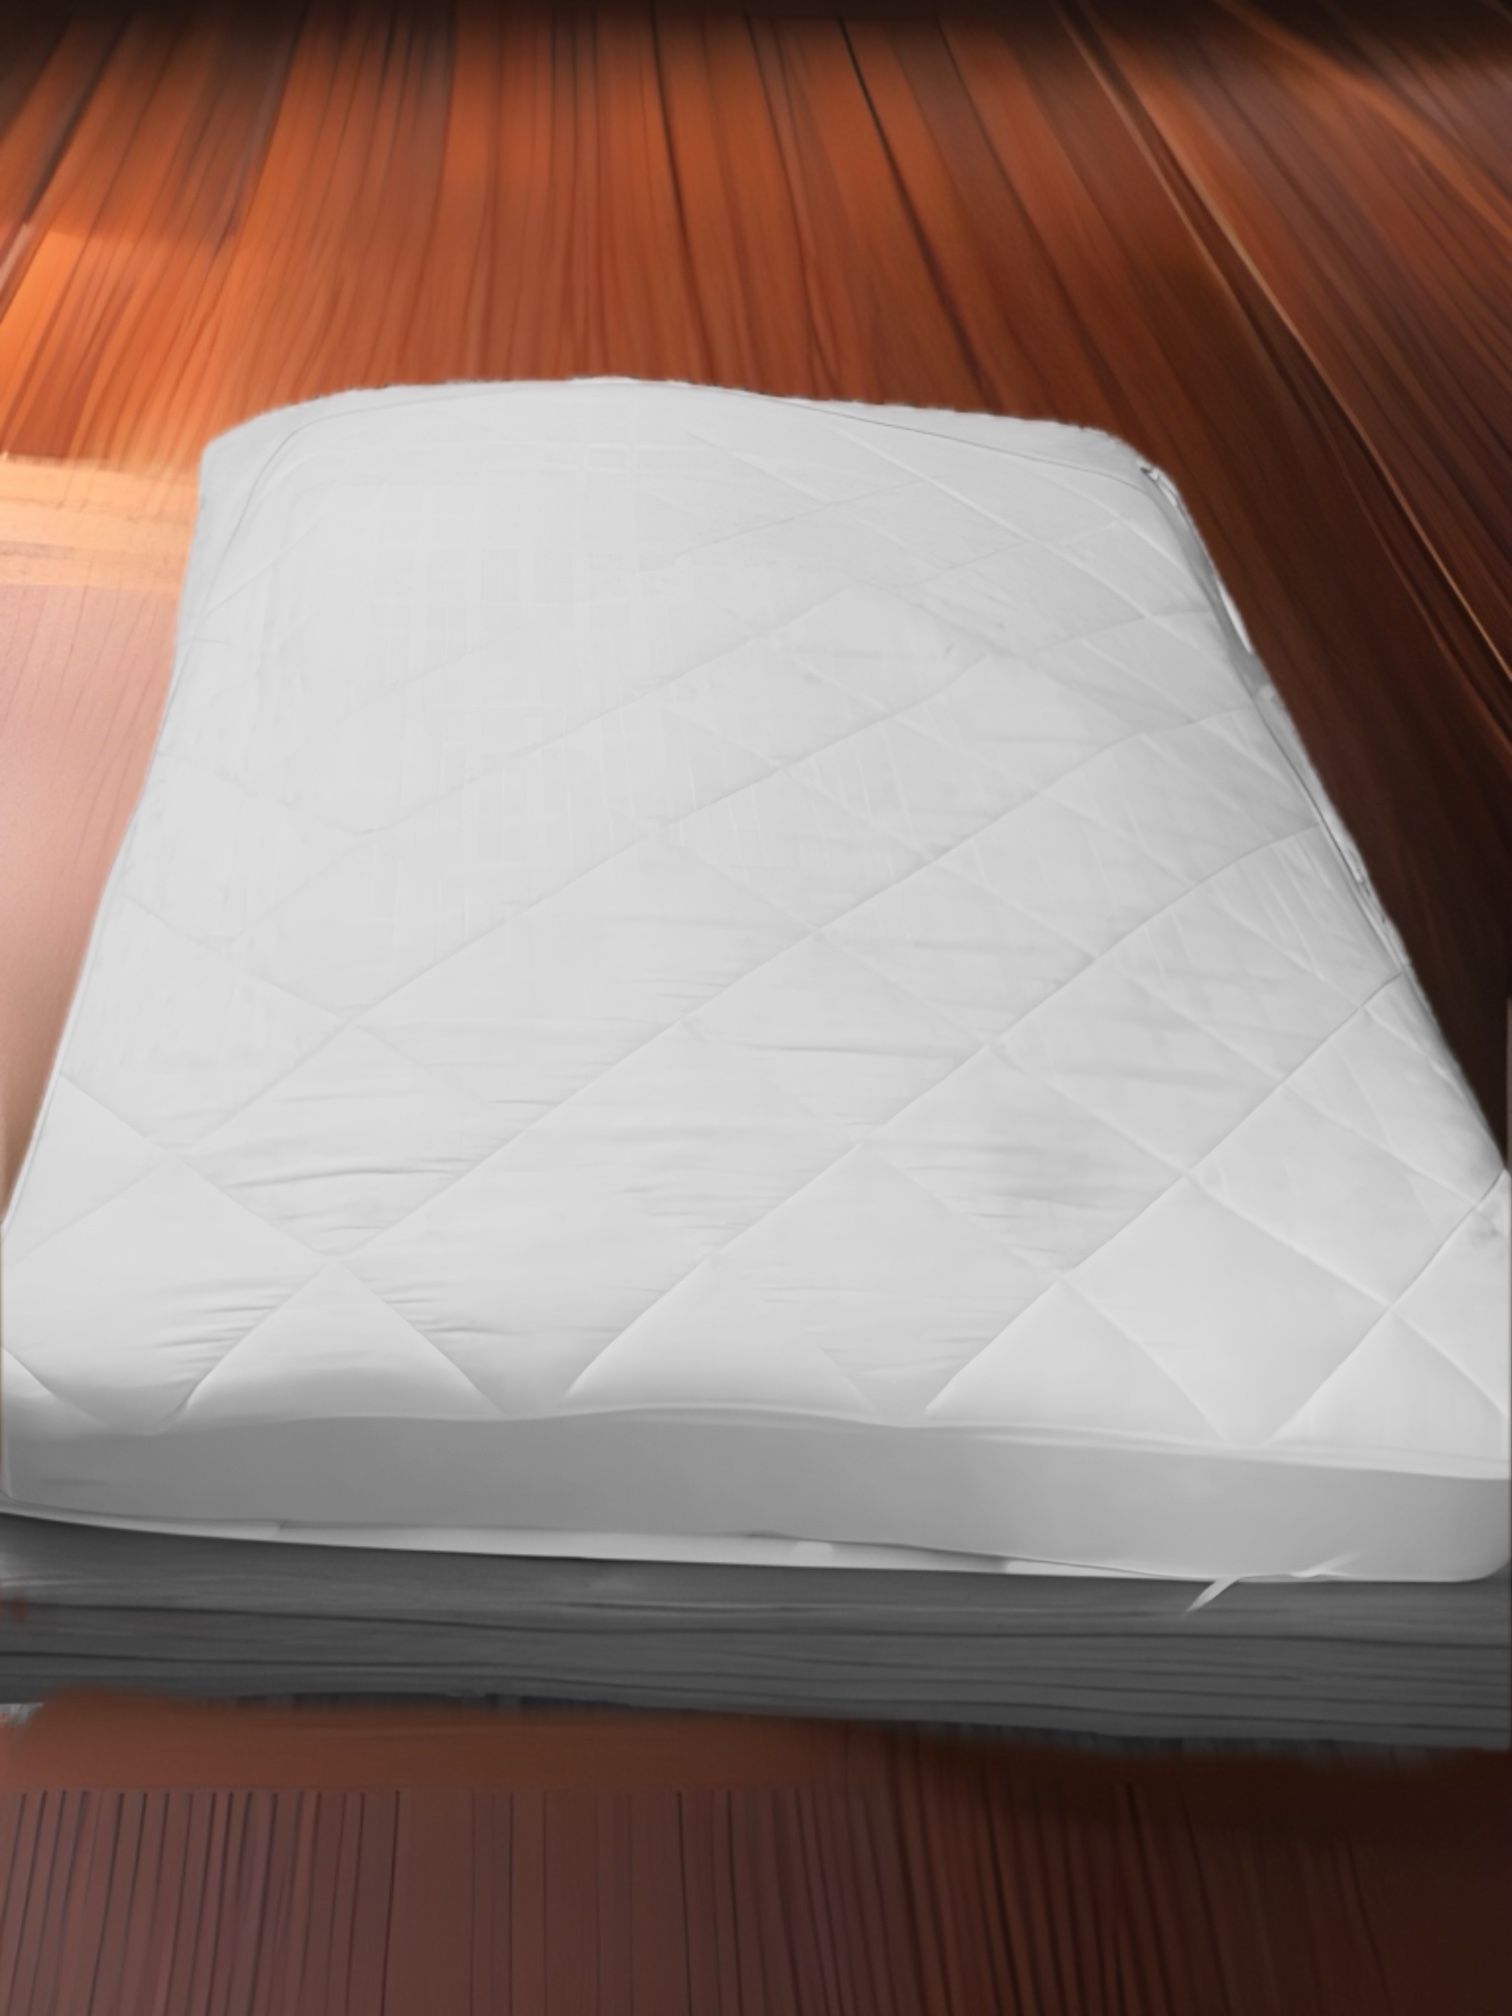 Full-Size Mattress With Mattress Protector